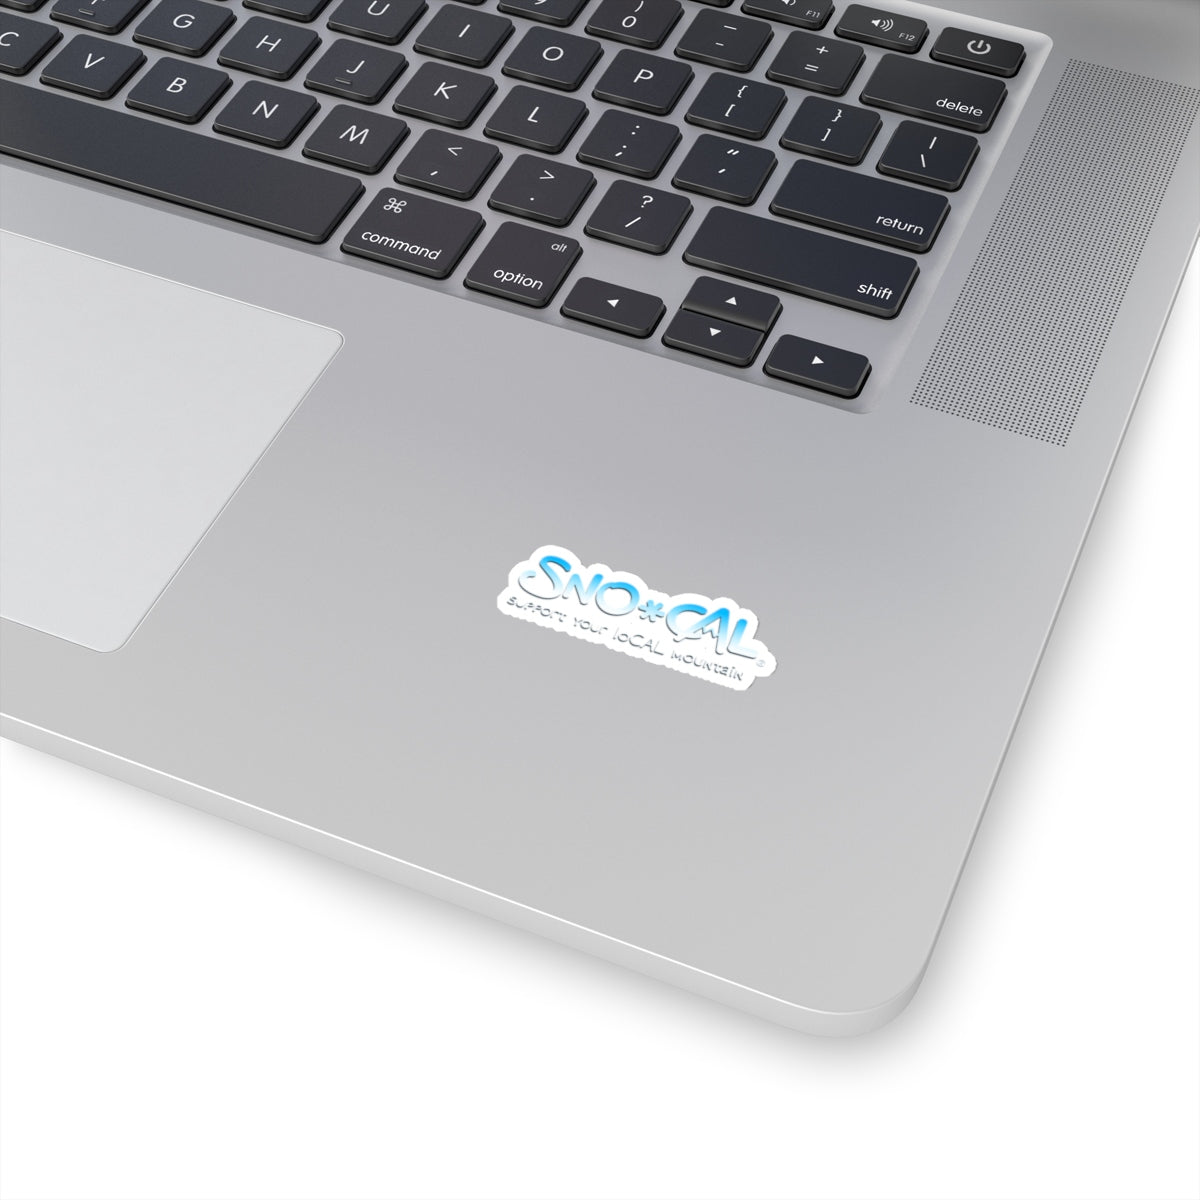 Sno Cal® Icy Blue & White Support your loCAL mountain sticker - Sno Cal